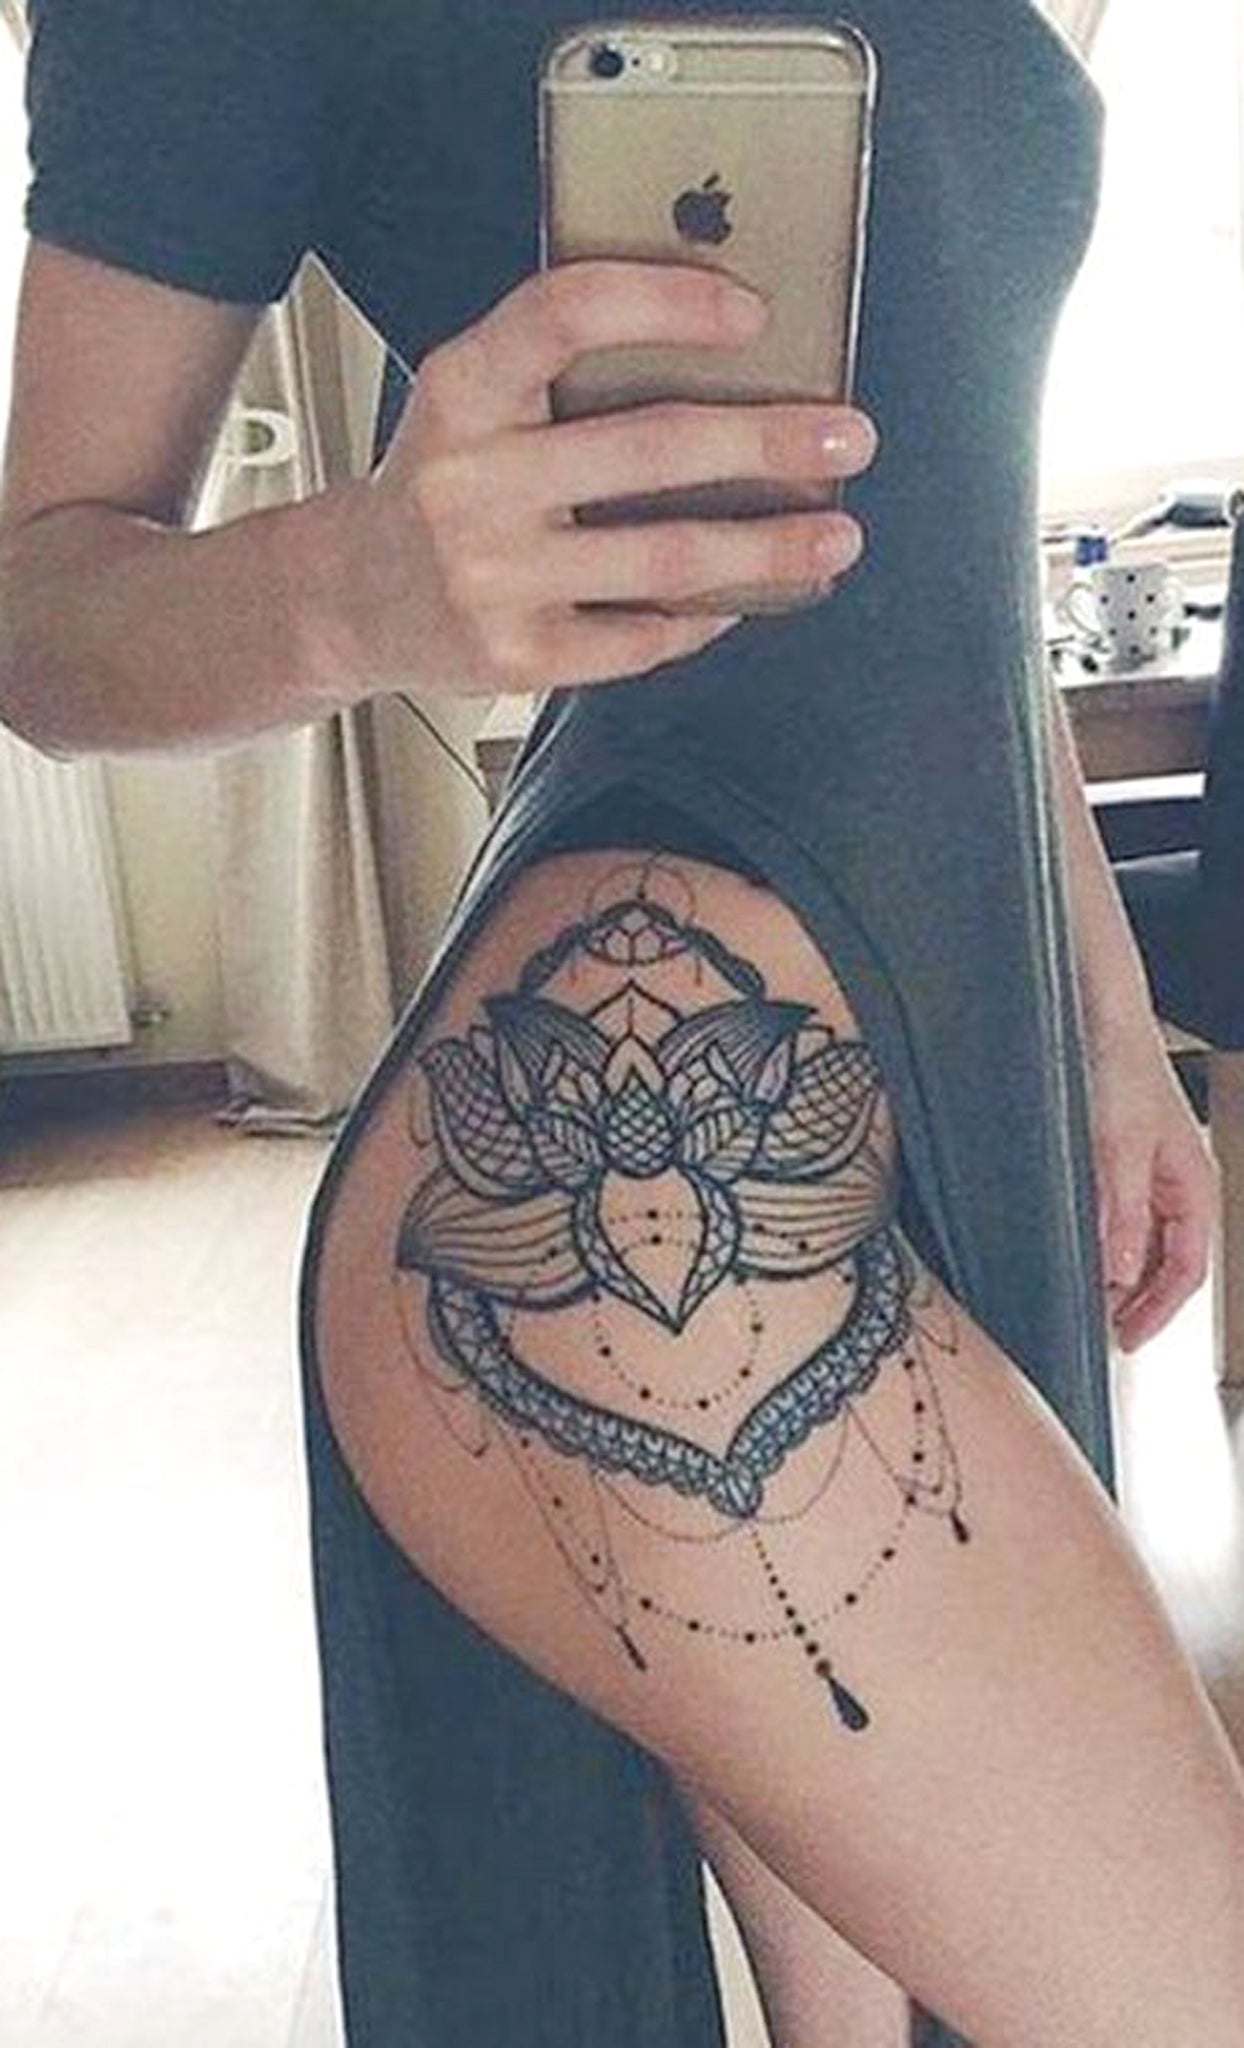 Hip Tattoos 48 Most Beautiful and Irresistible Hip Tattoo Ideas for Women